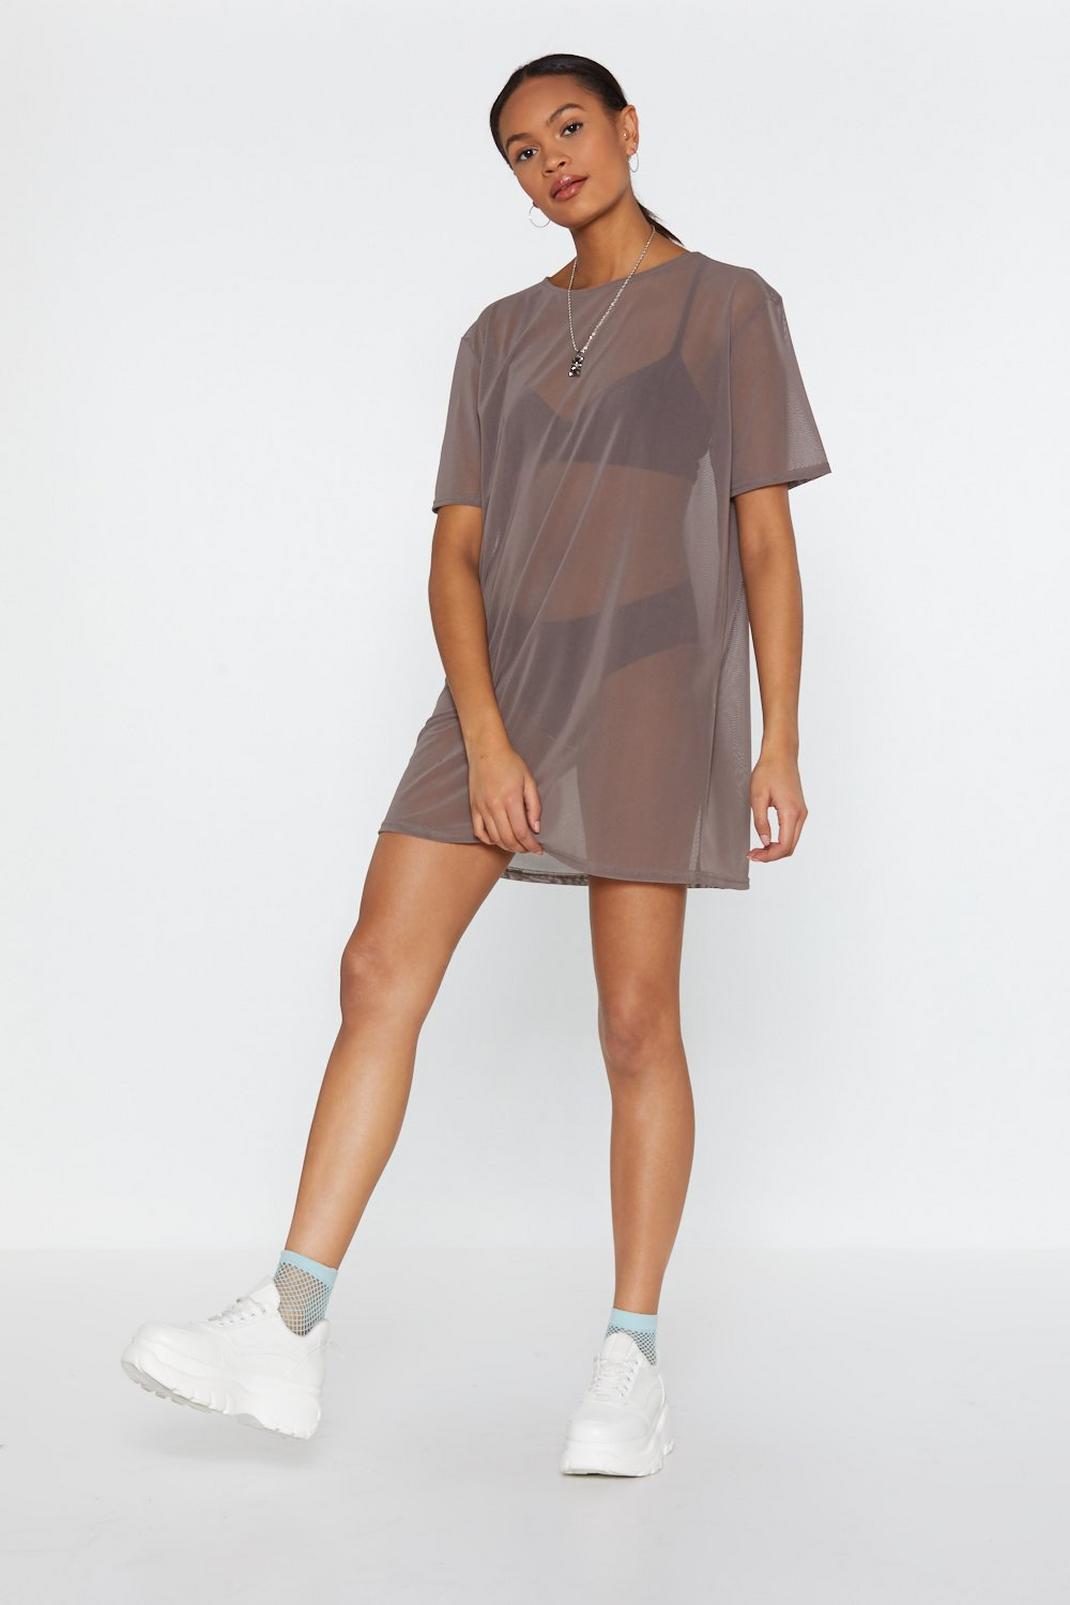 See Clearly Now Mesh Dress image number 1